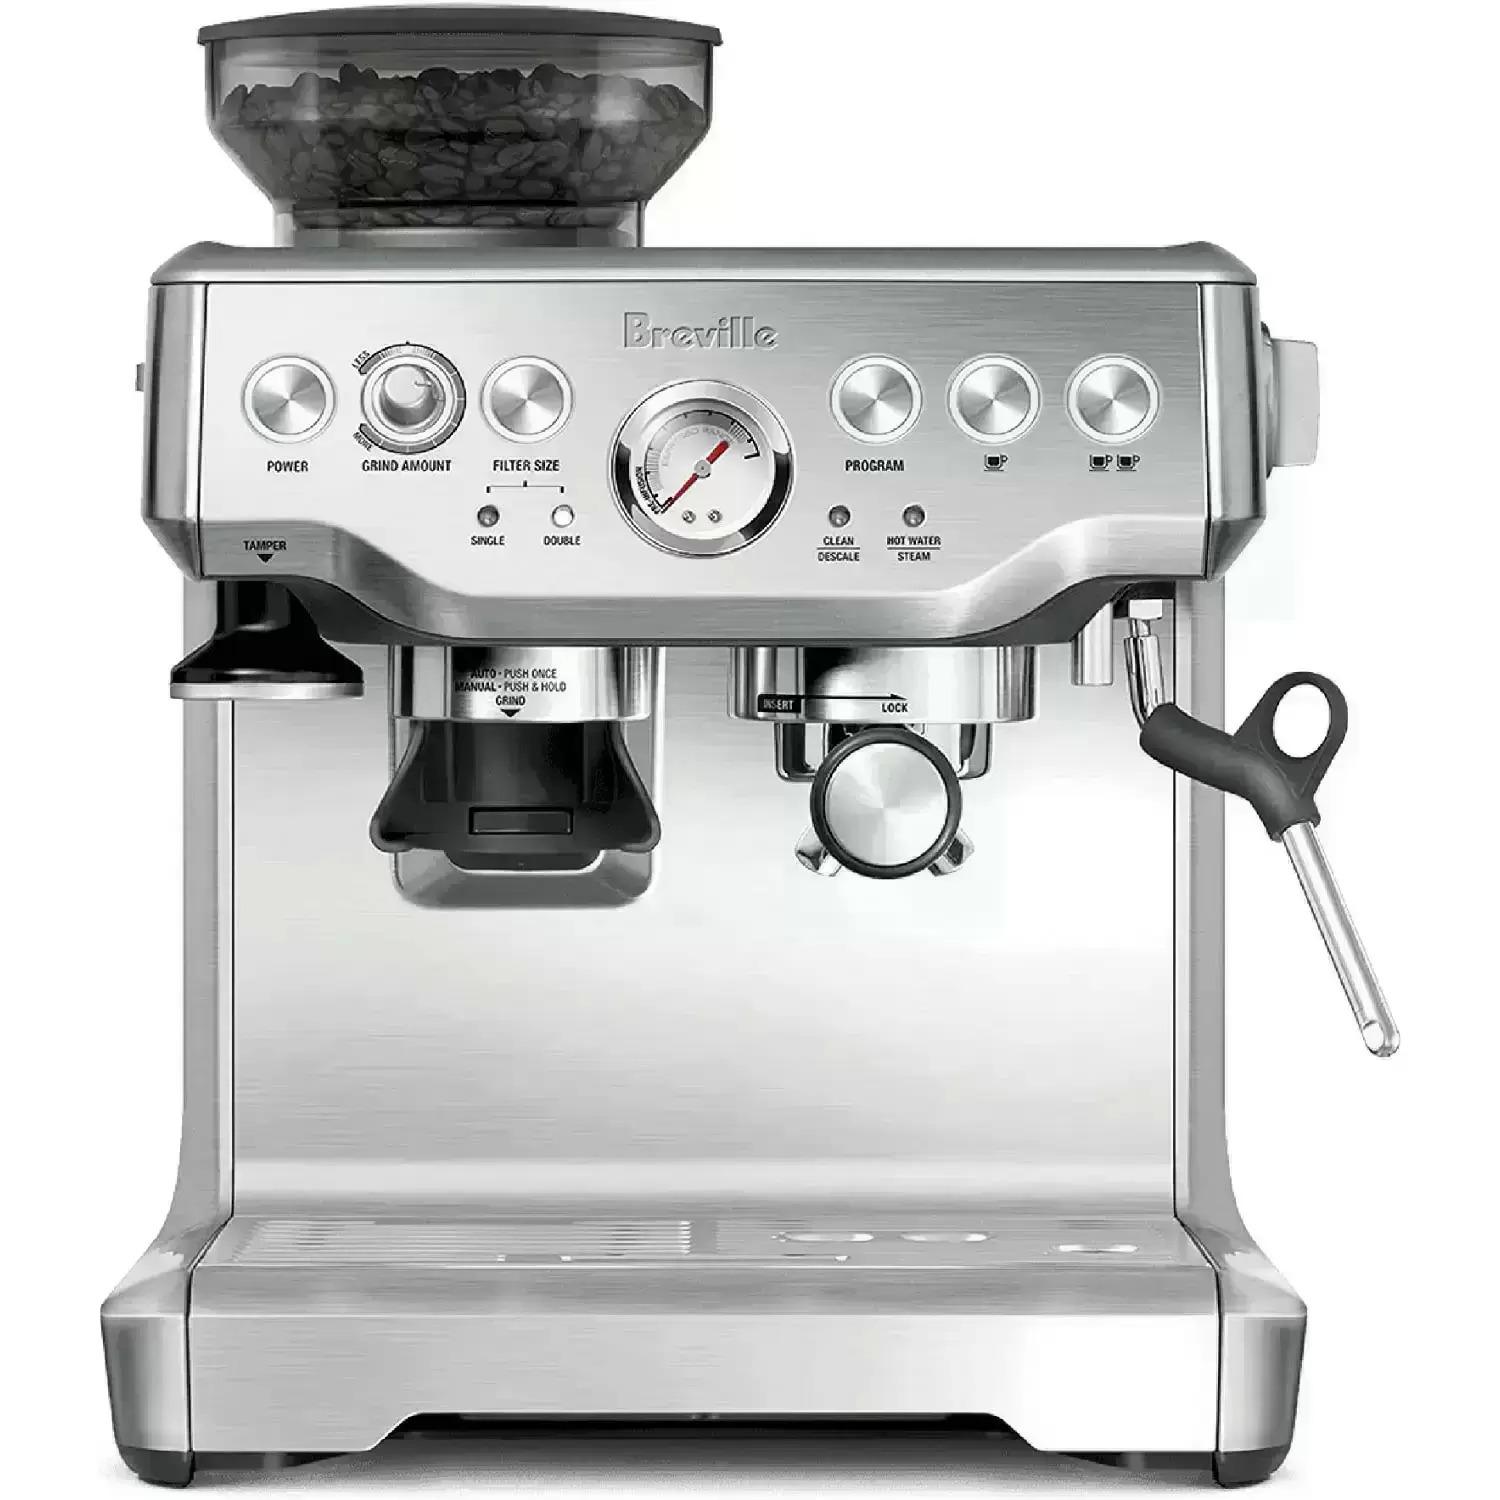 Breville BES870XL Barista Express Espresso Machine for $559.95 Shipped